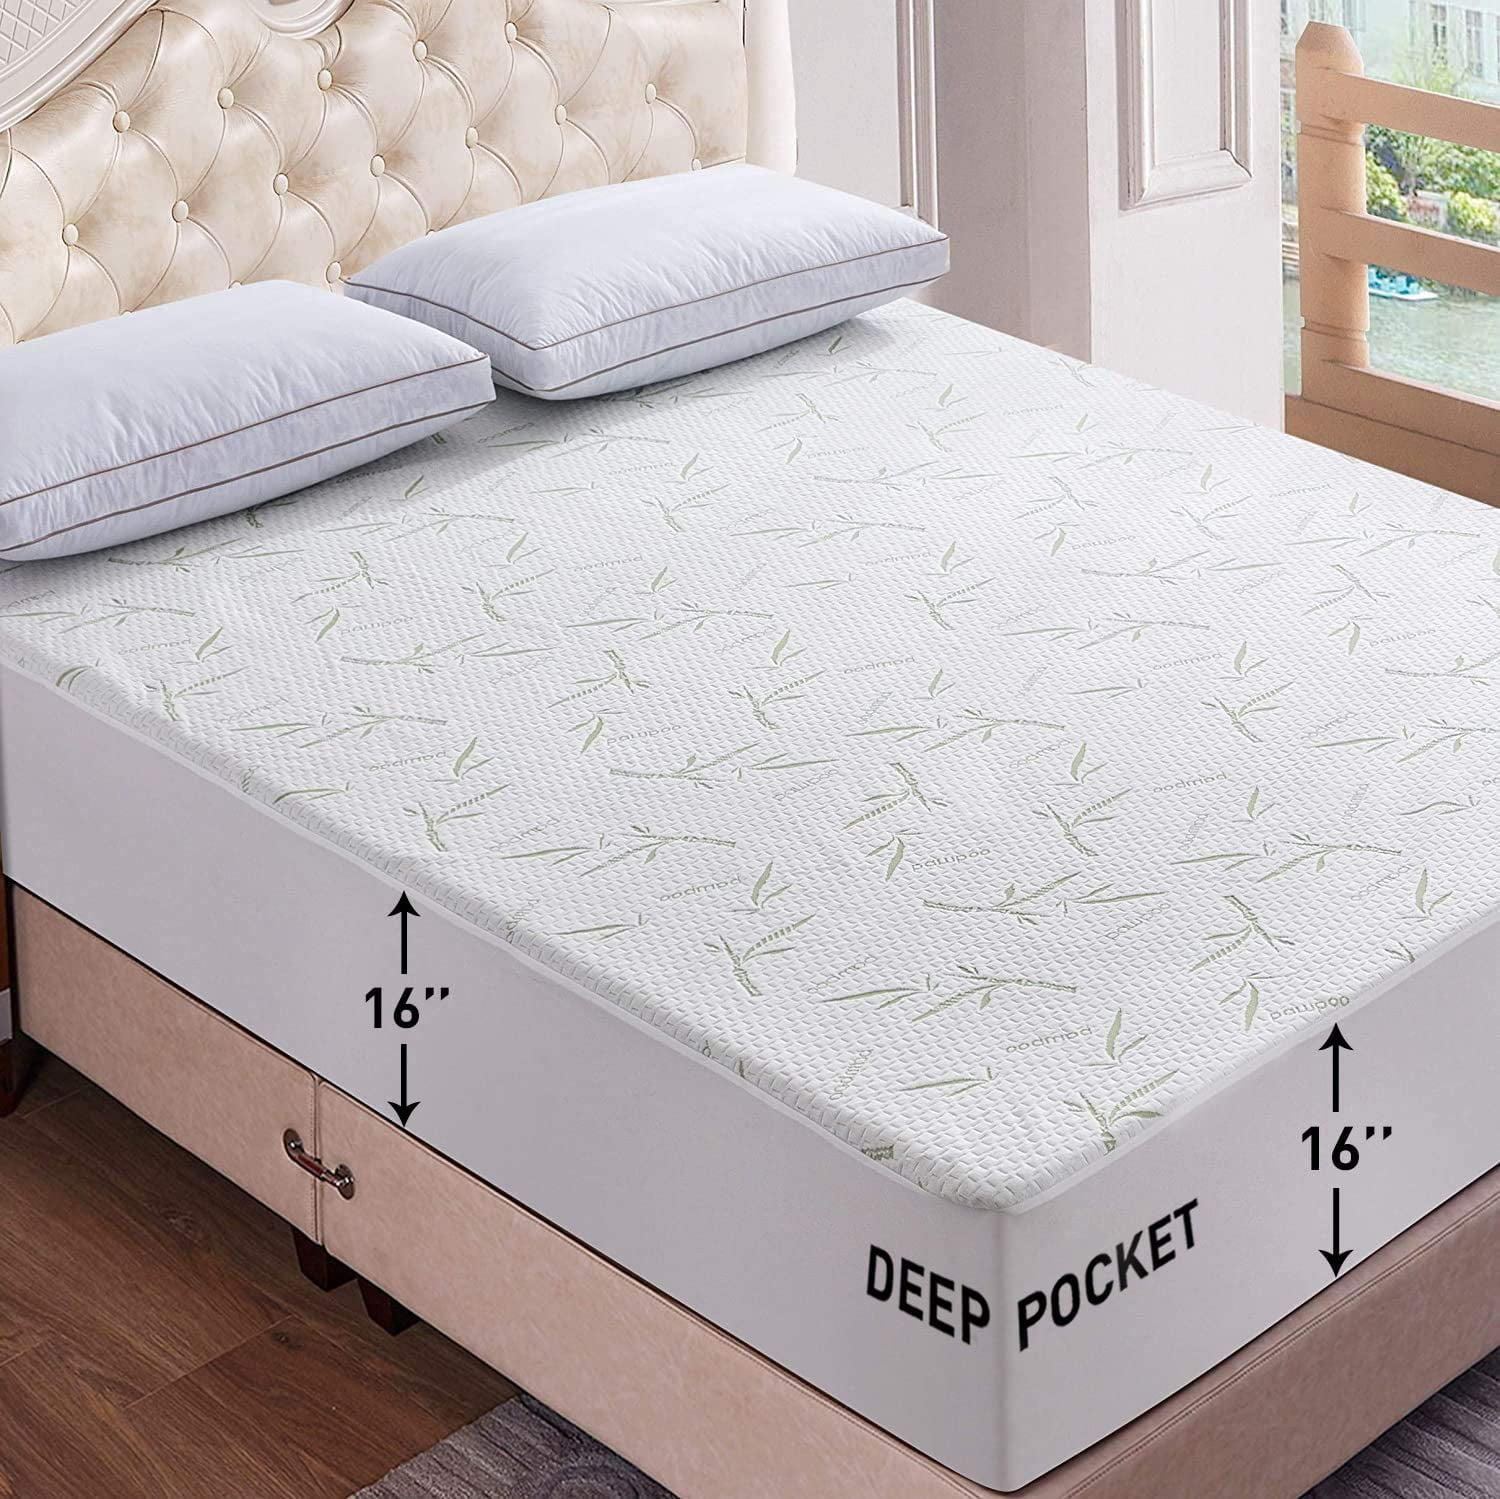 Mattress Protector Waterproof Bamboo Soft Hypoallergenic Fitted Mattress Cover 